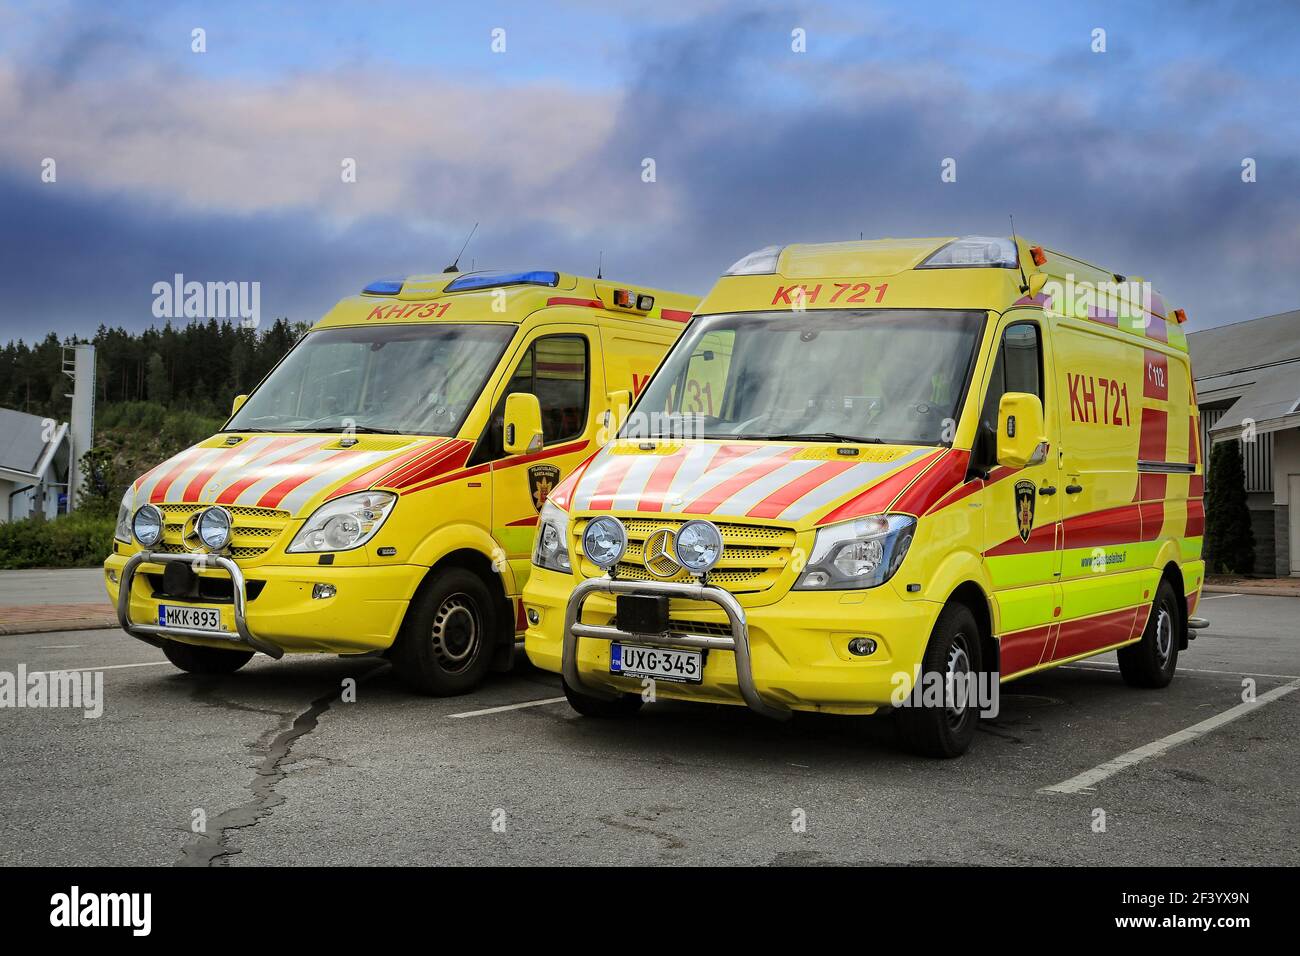 Two Mercedes-Benz ambulance vehicles parked outside a service station. Finland. Stock Photo